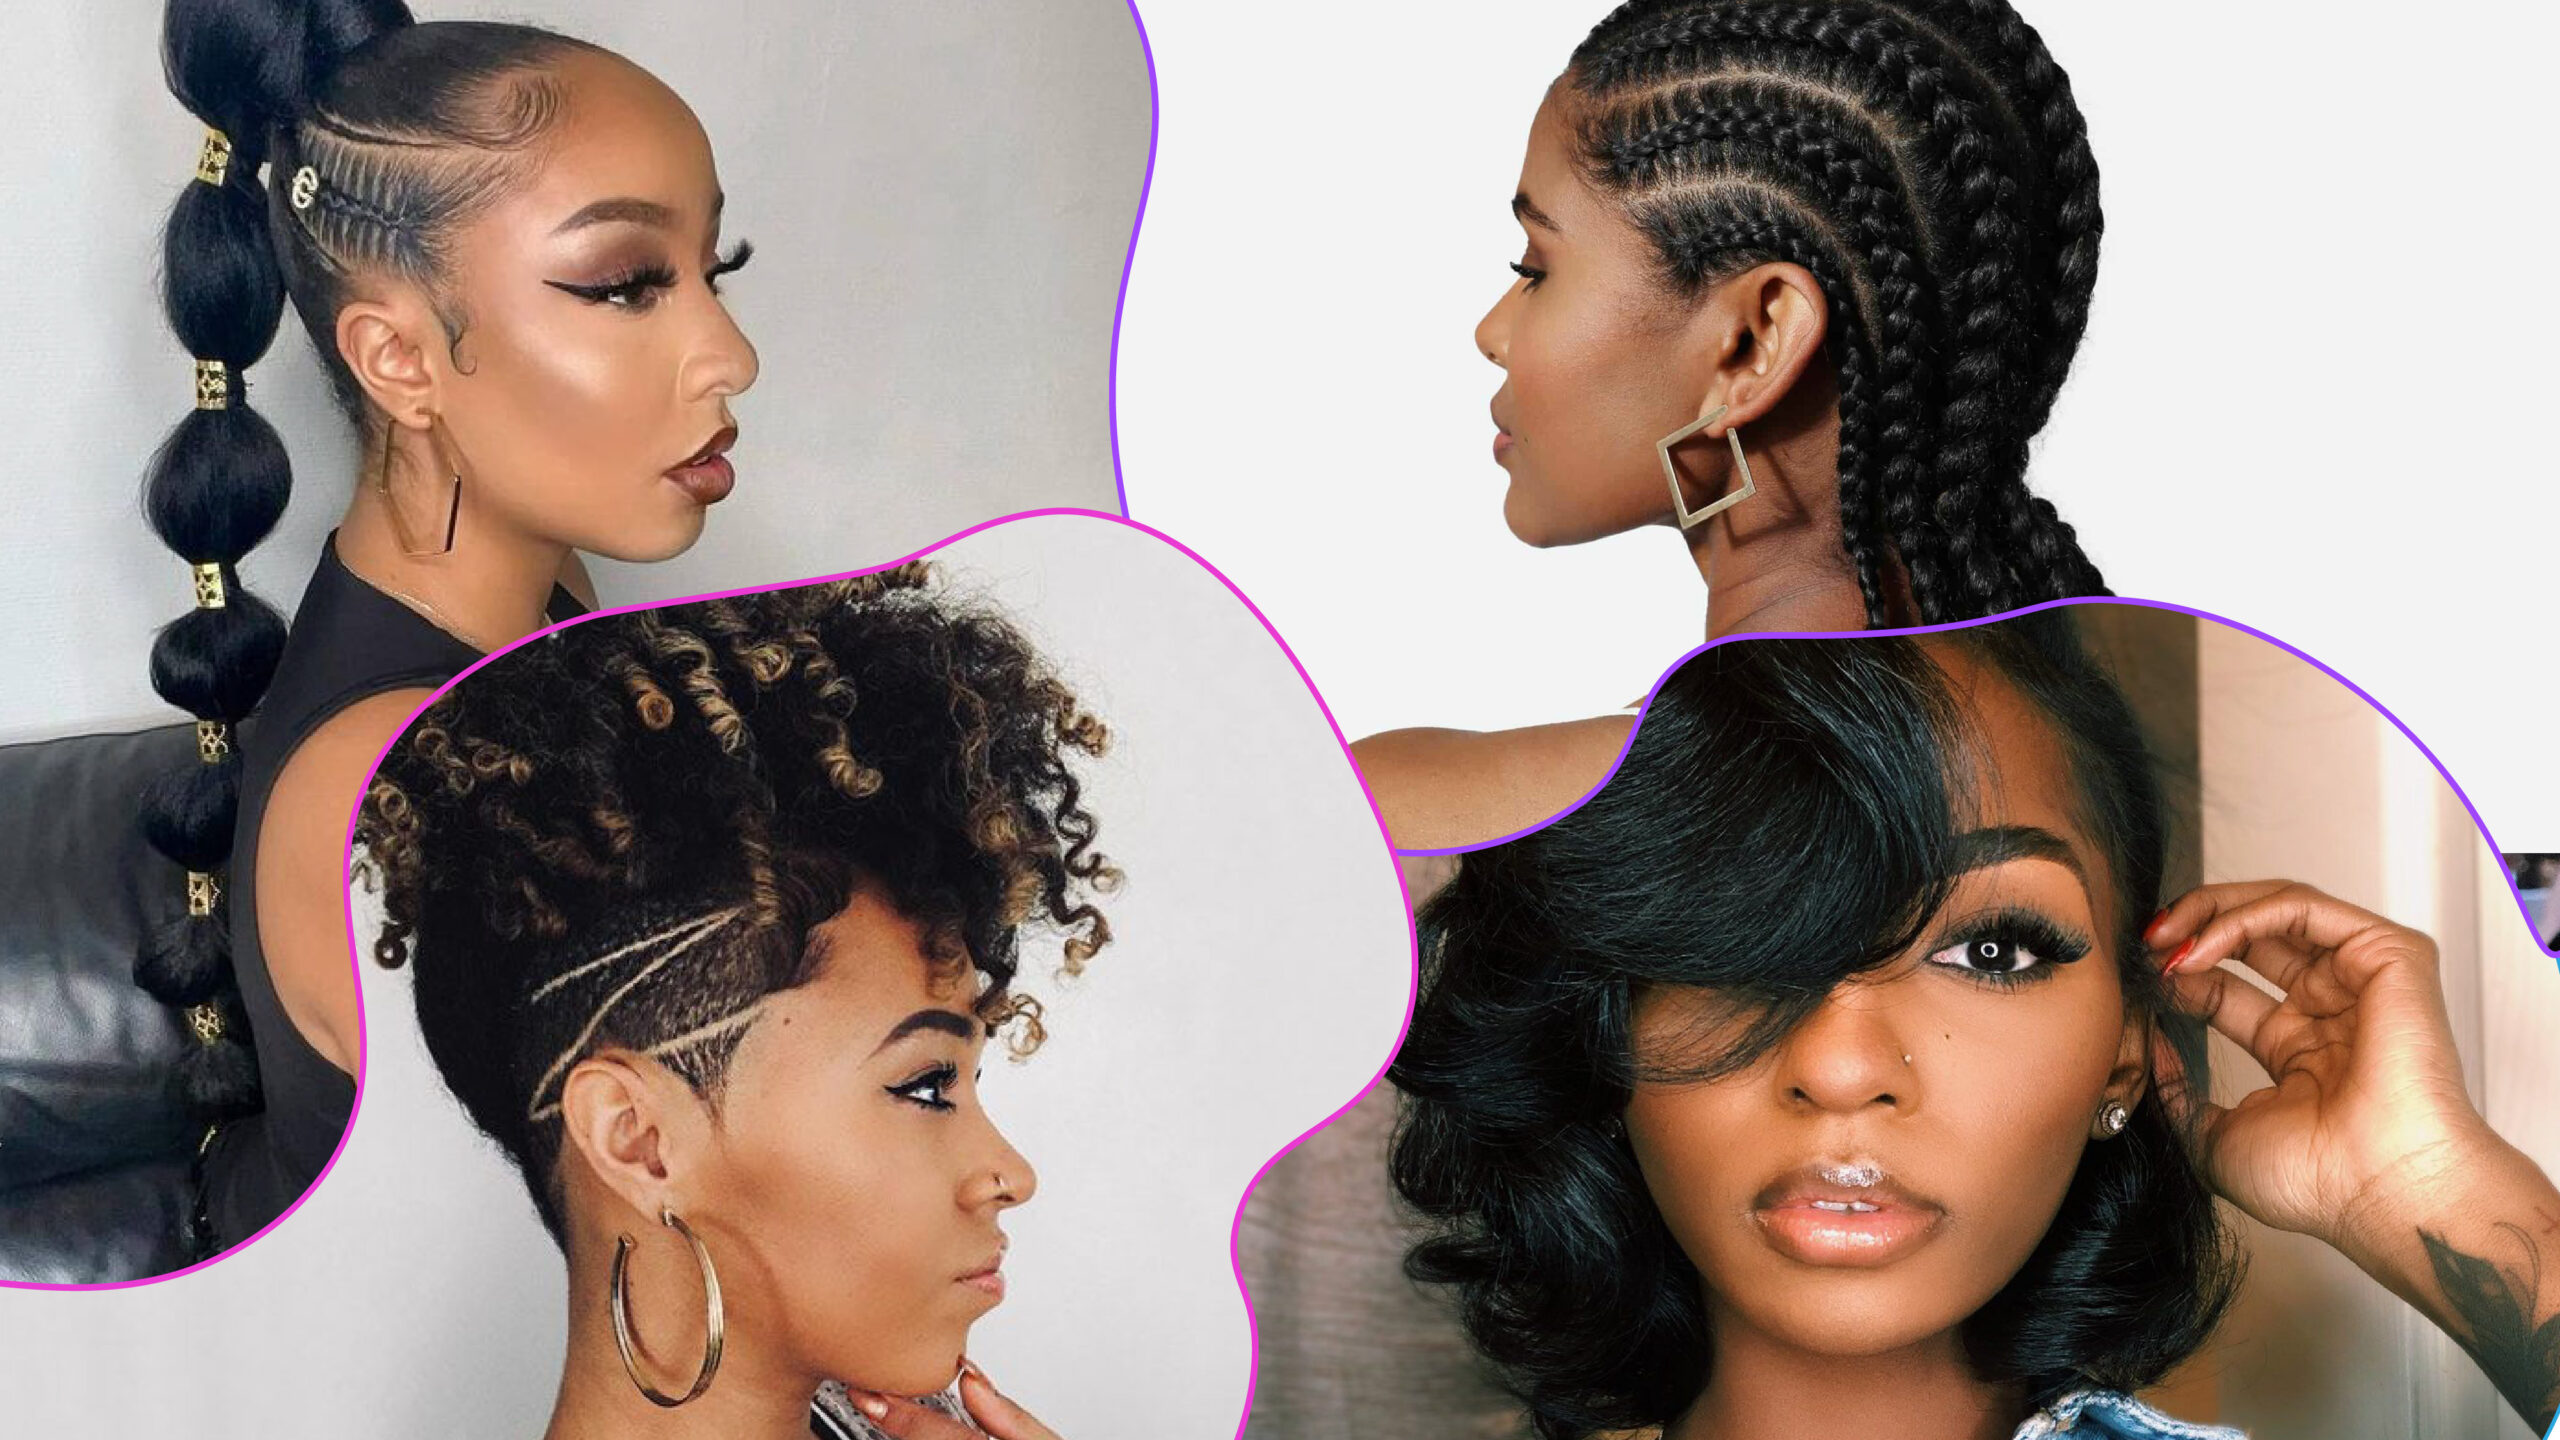 The Most Popular Hairstyles In 2022 For Black Women - Girls United